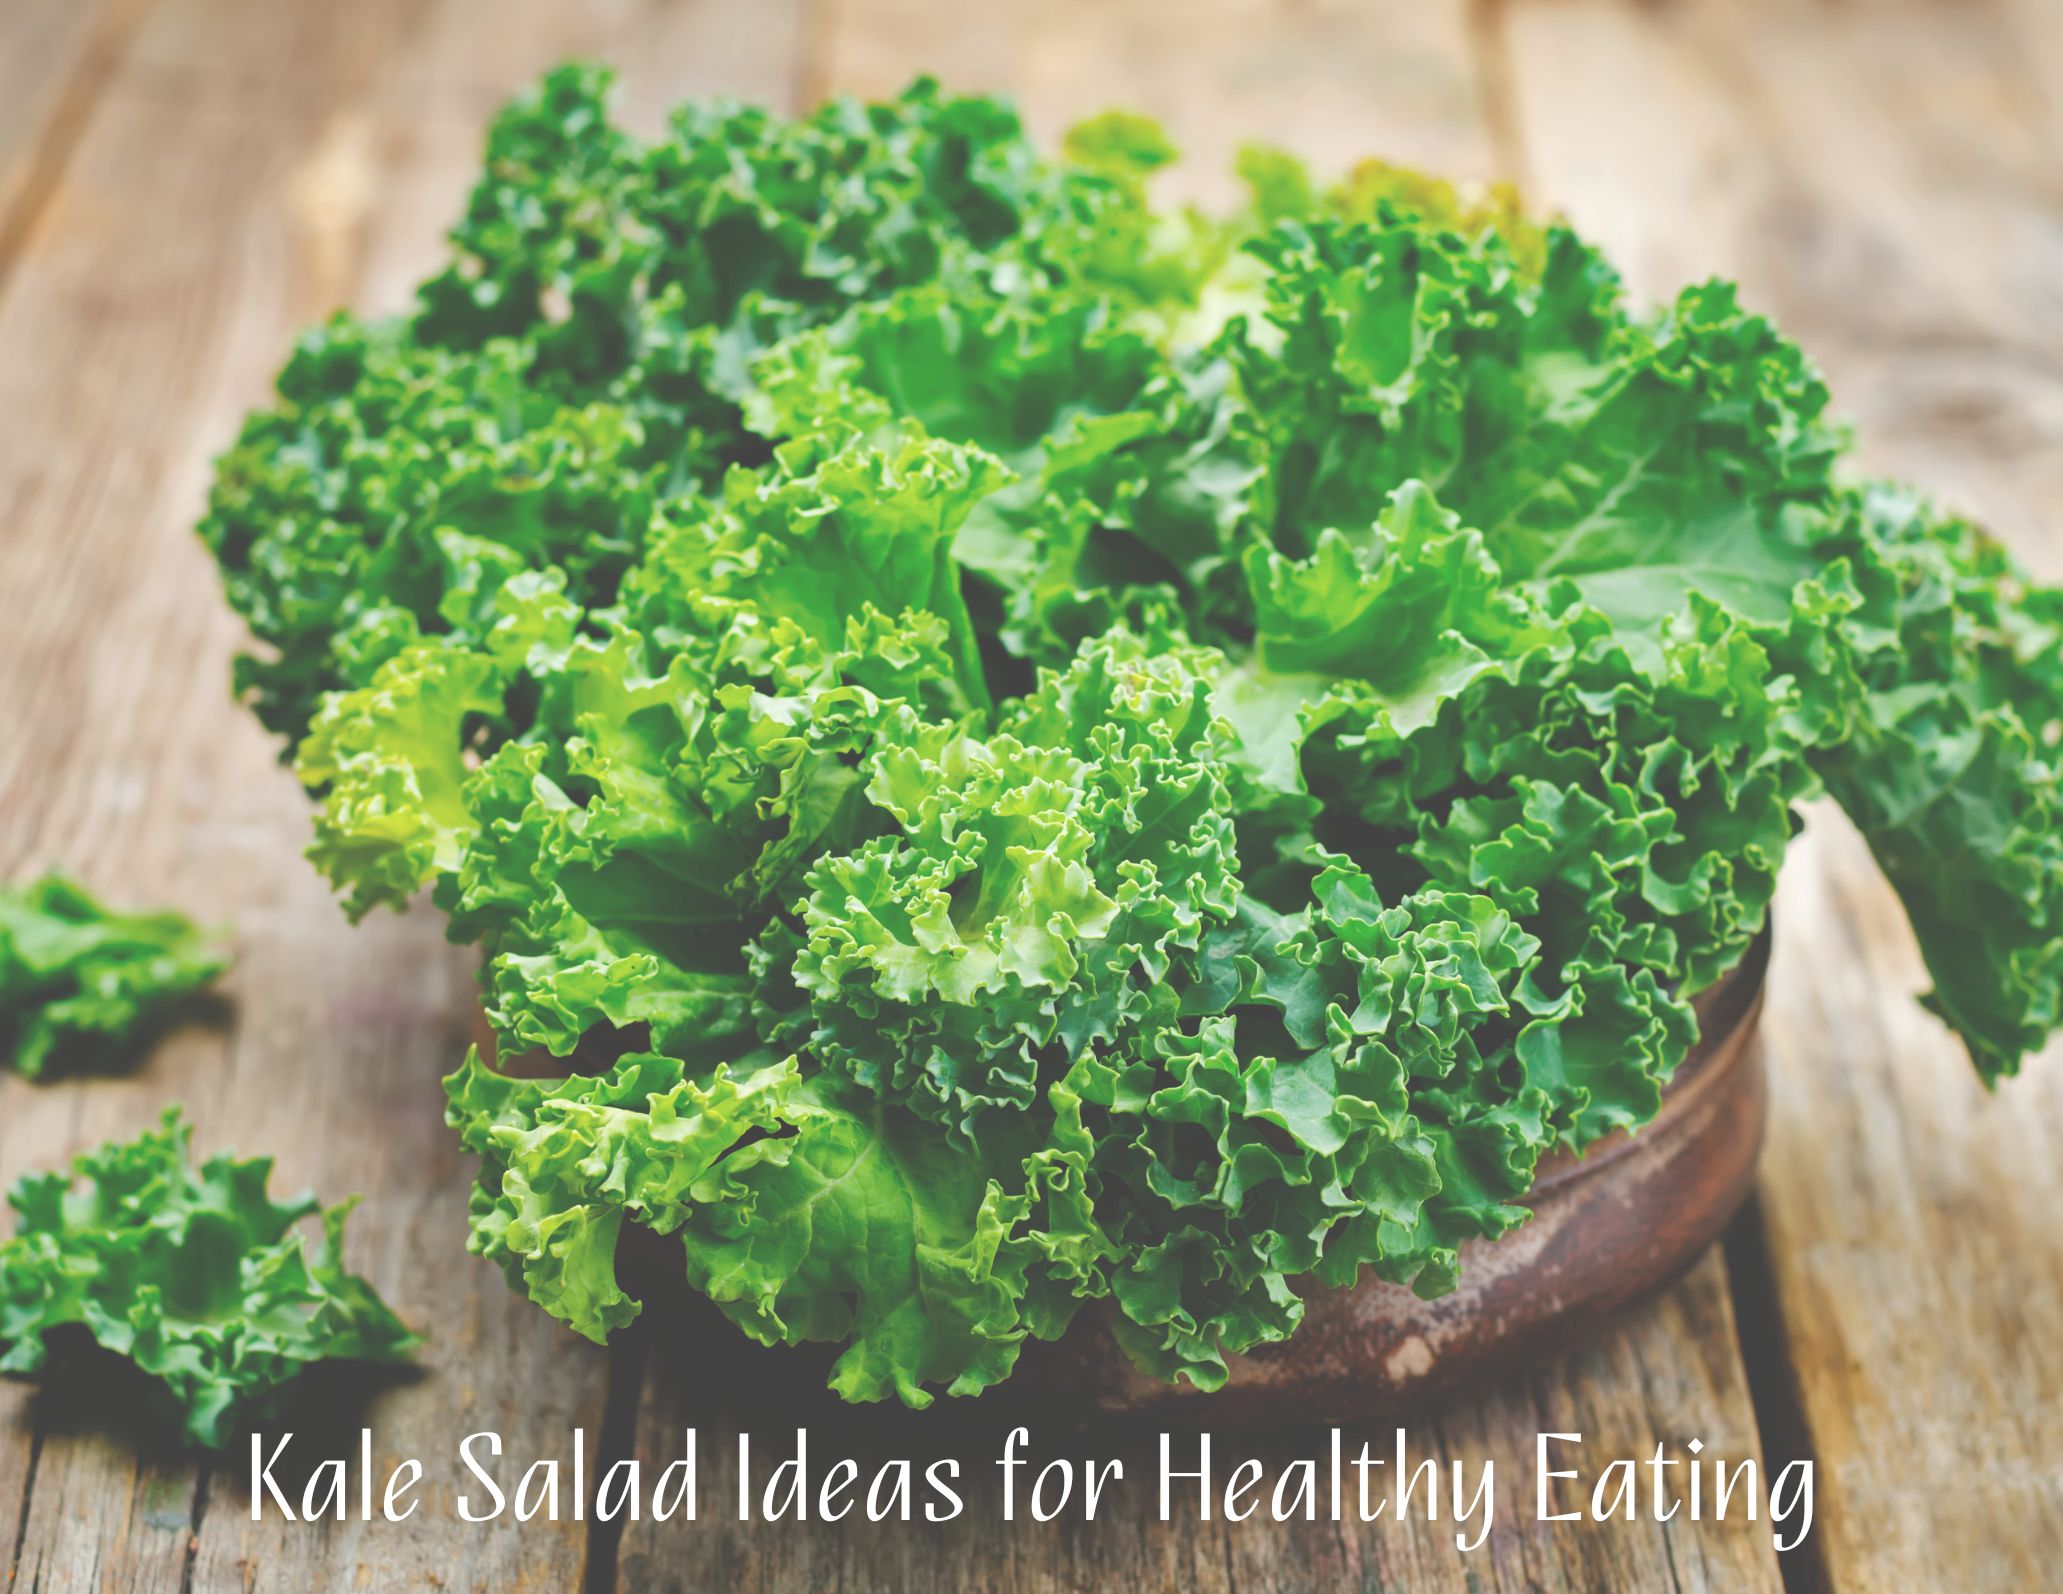 Kale Salad Recipe Ideas for Healthy Eating